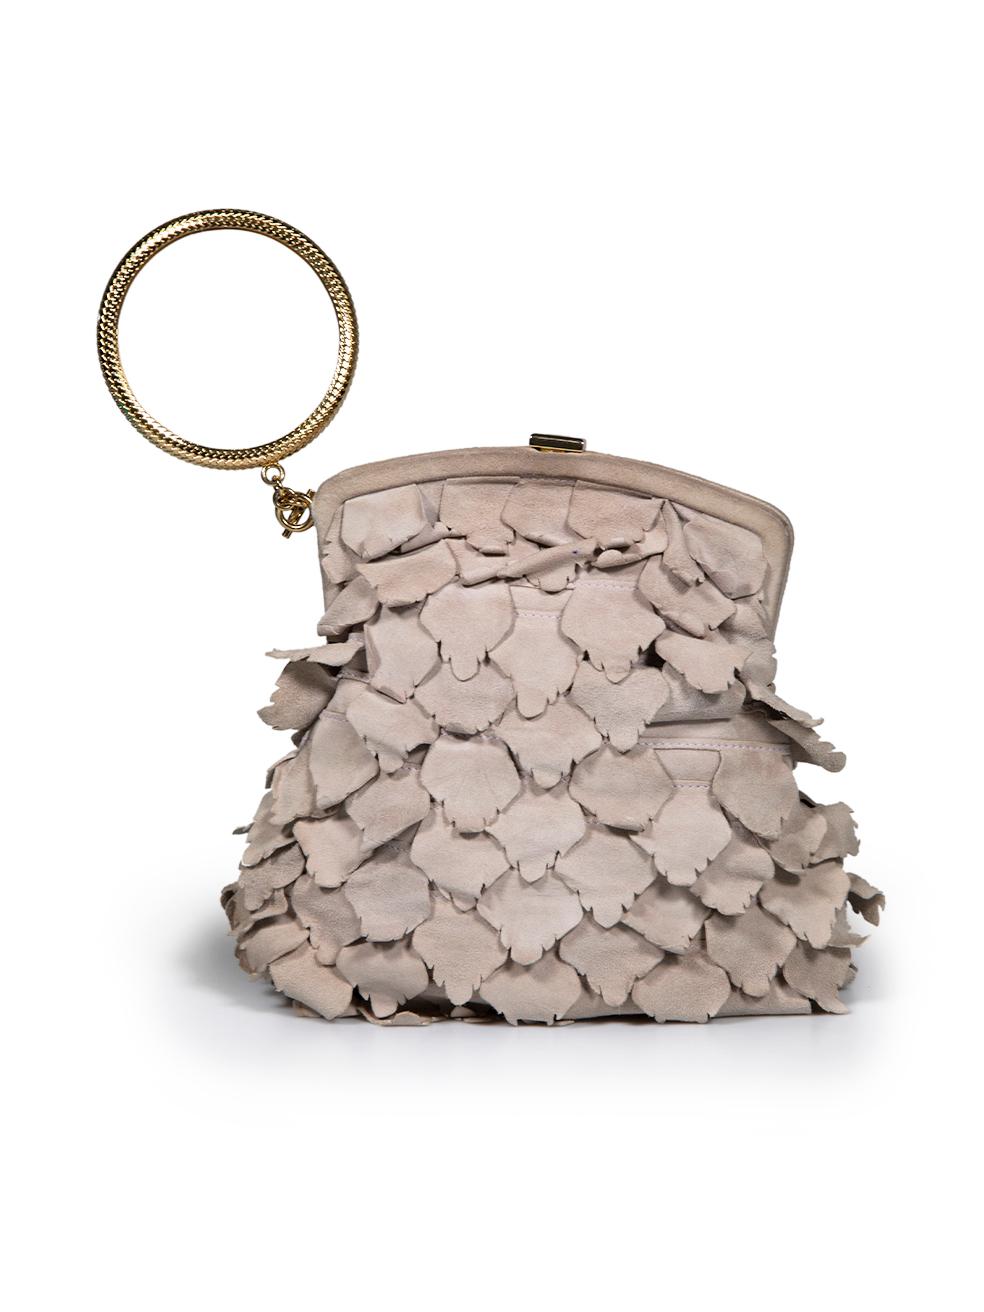 Roberto Cavalli Beige Suede Scale Accent Clutch In Good Condition For Sale In London, GB